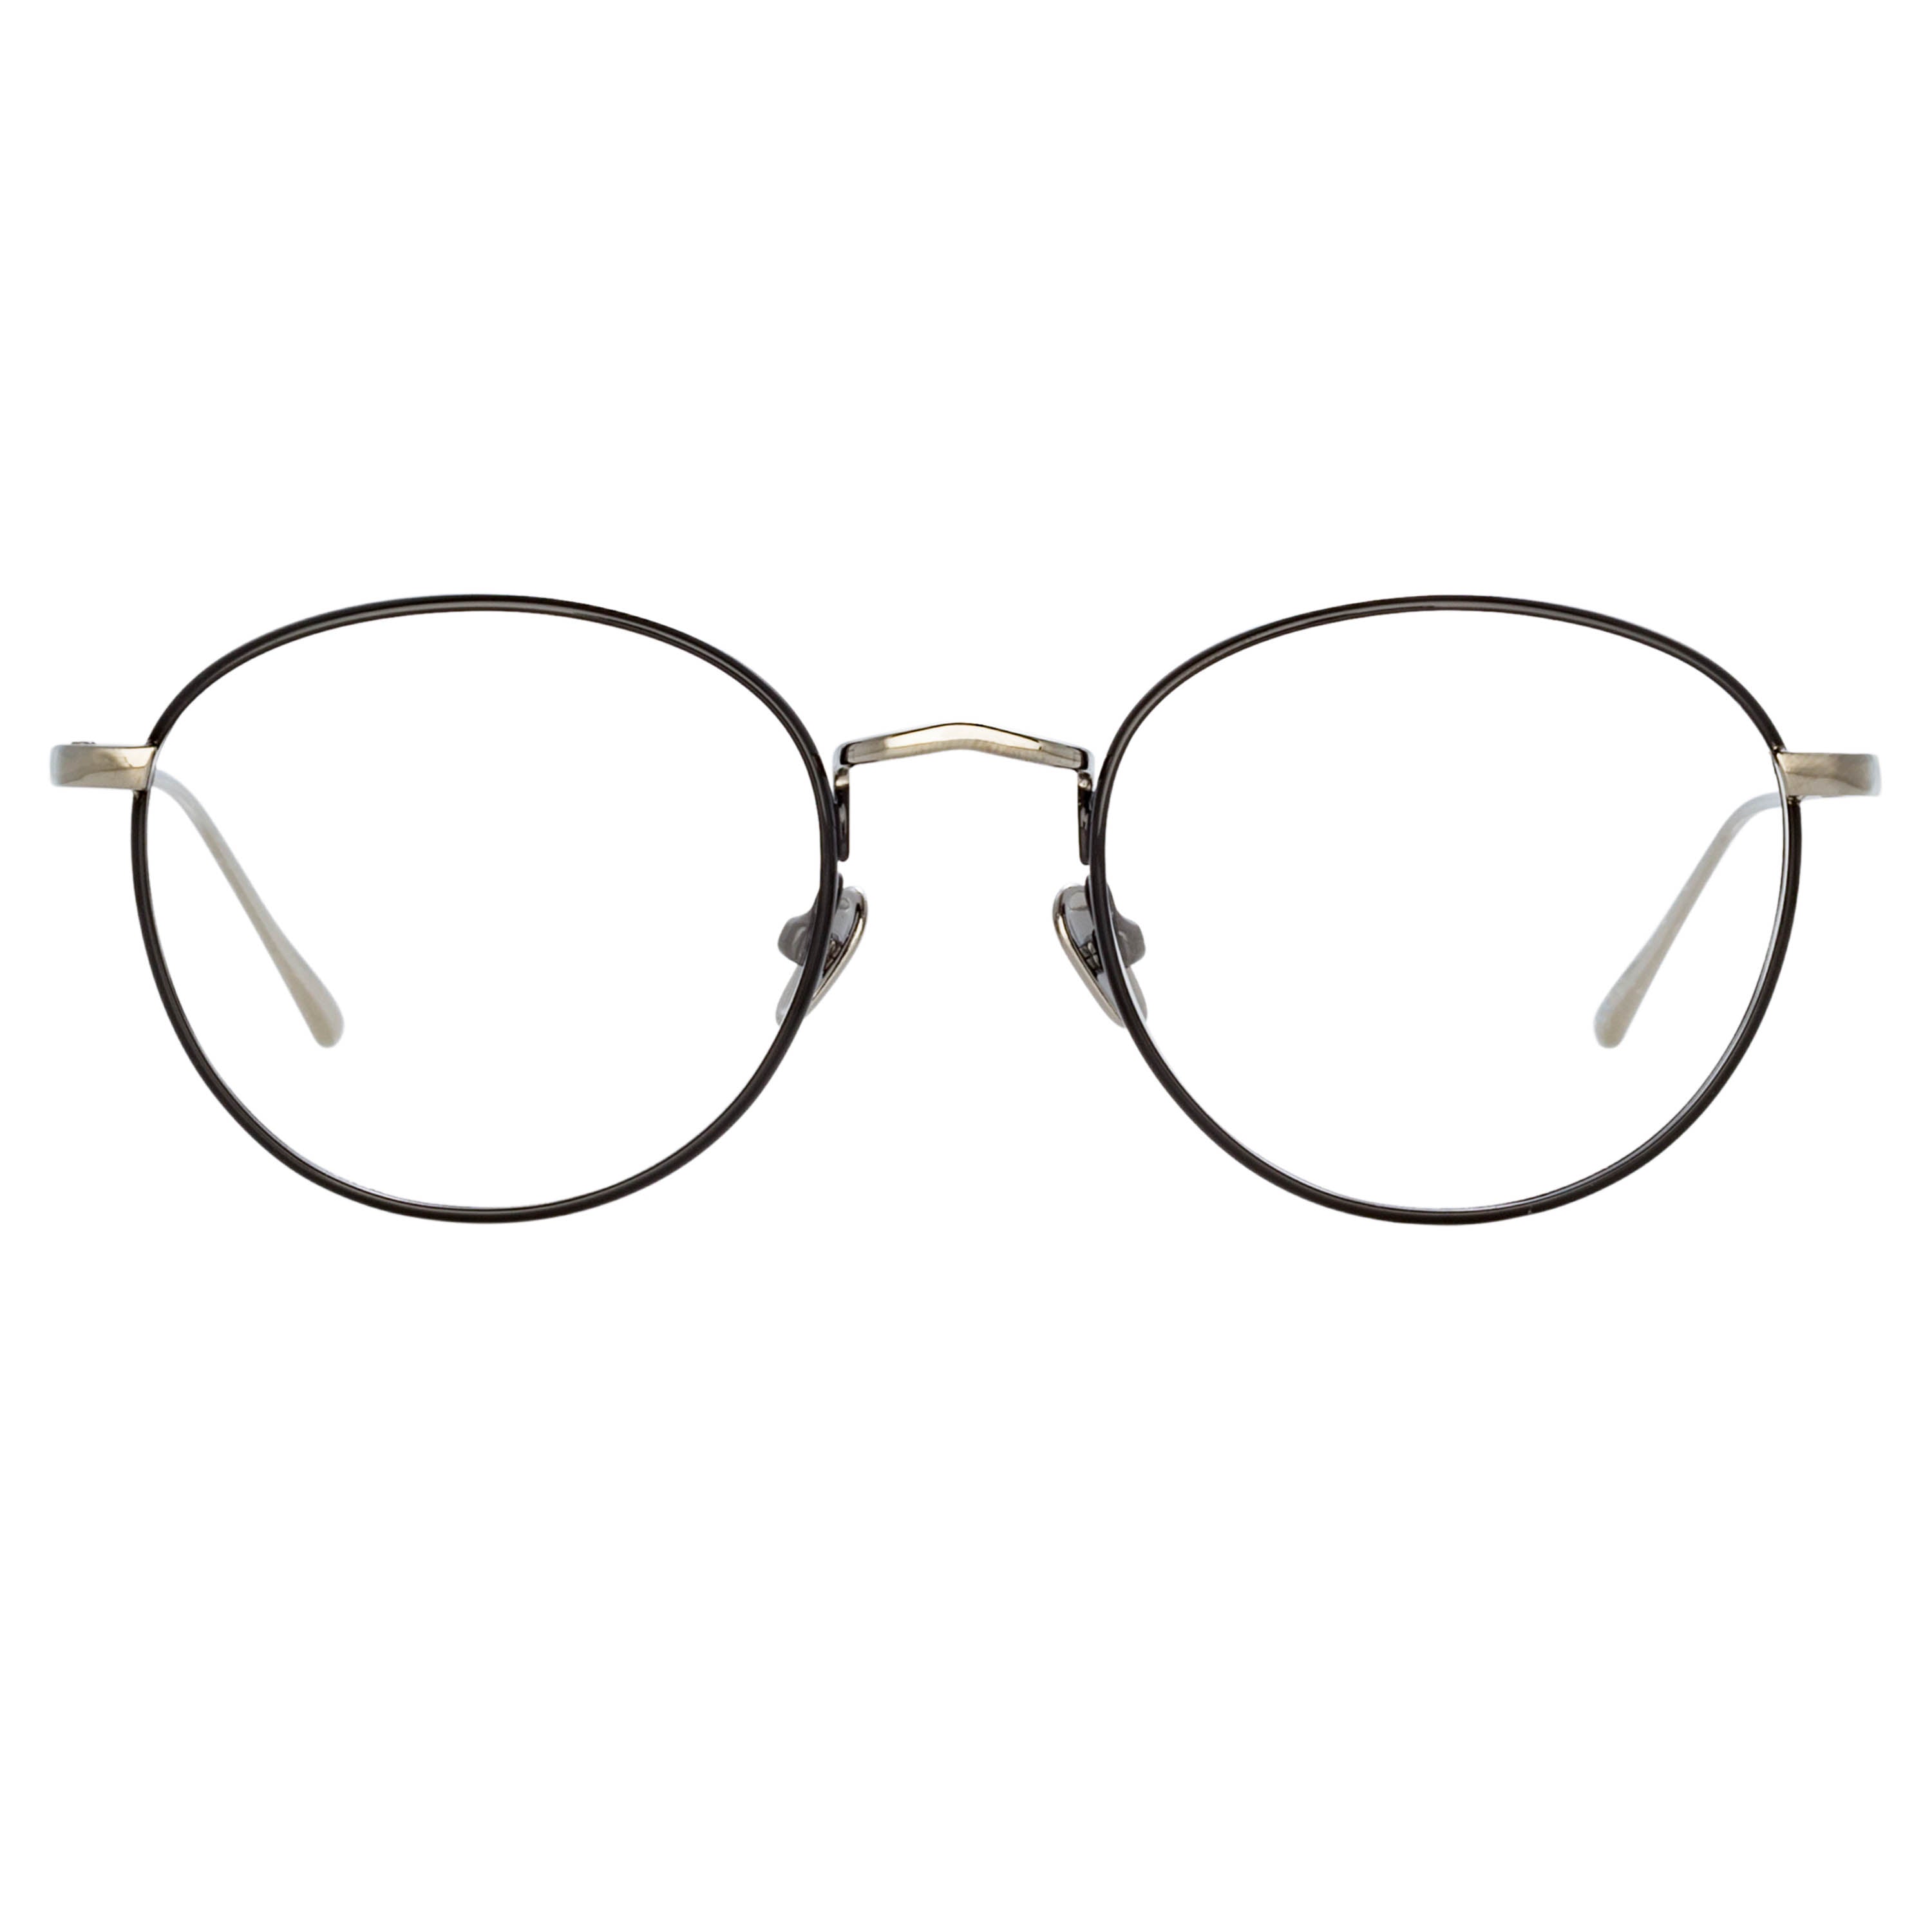 The Harrison Oval Optical Frame in Black and White Gold (C2)